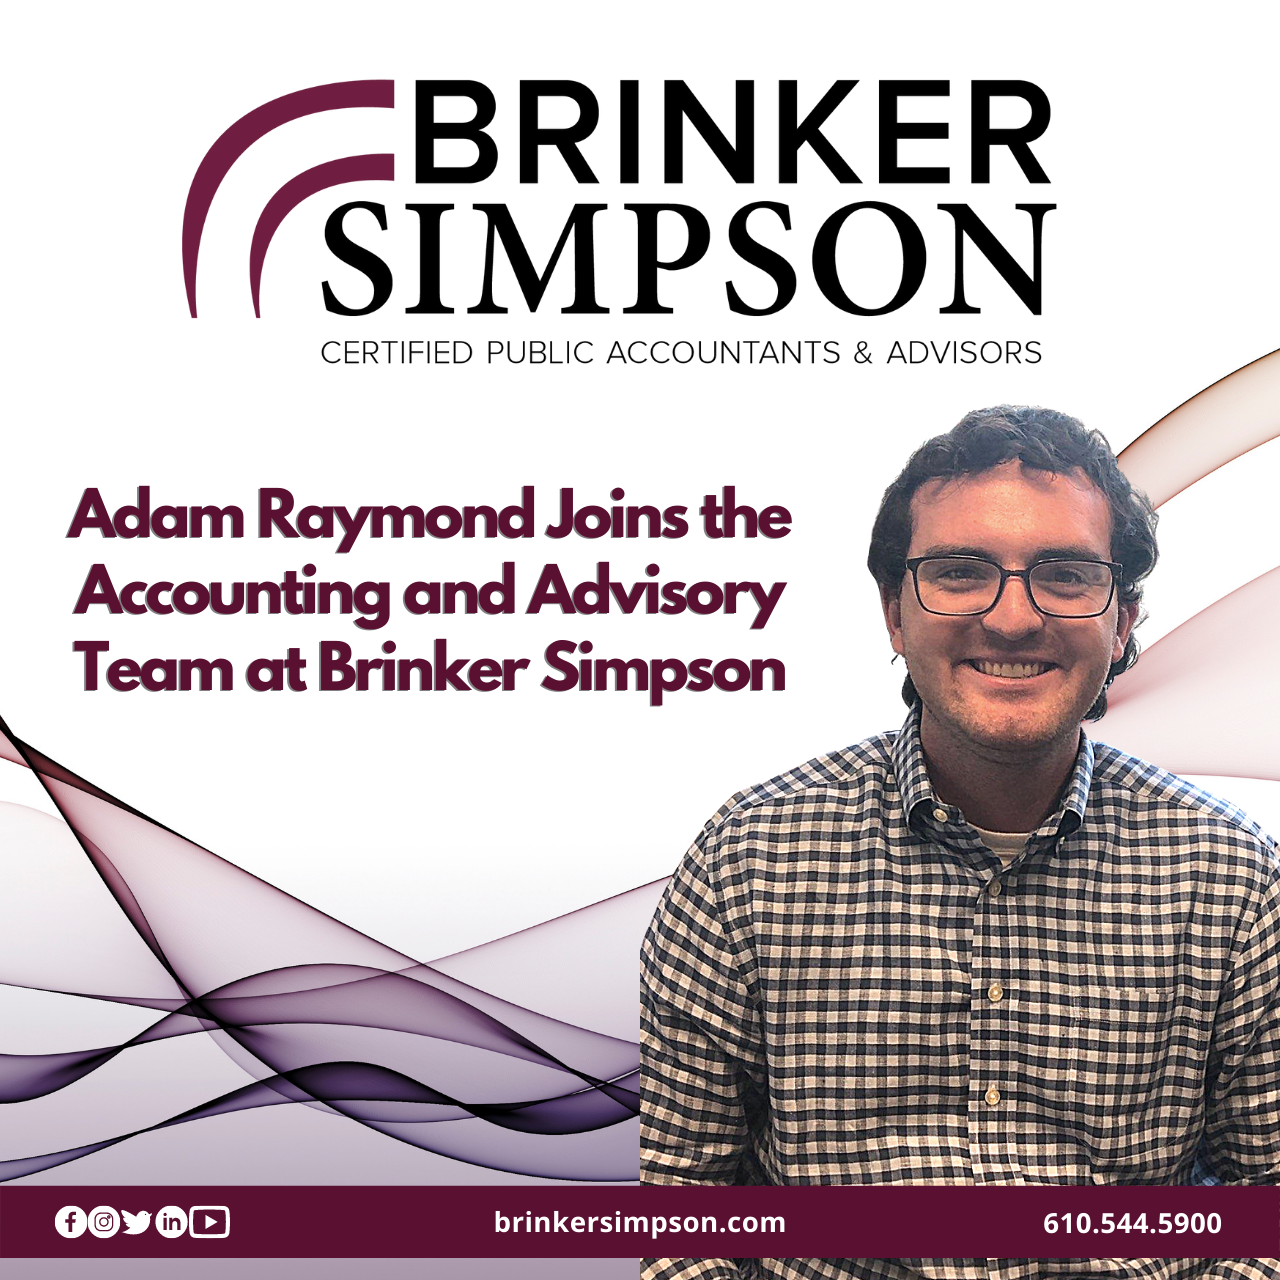 Adam Raymond Joins the Accounting and Advisory Team at Brinker Simpson